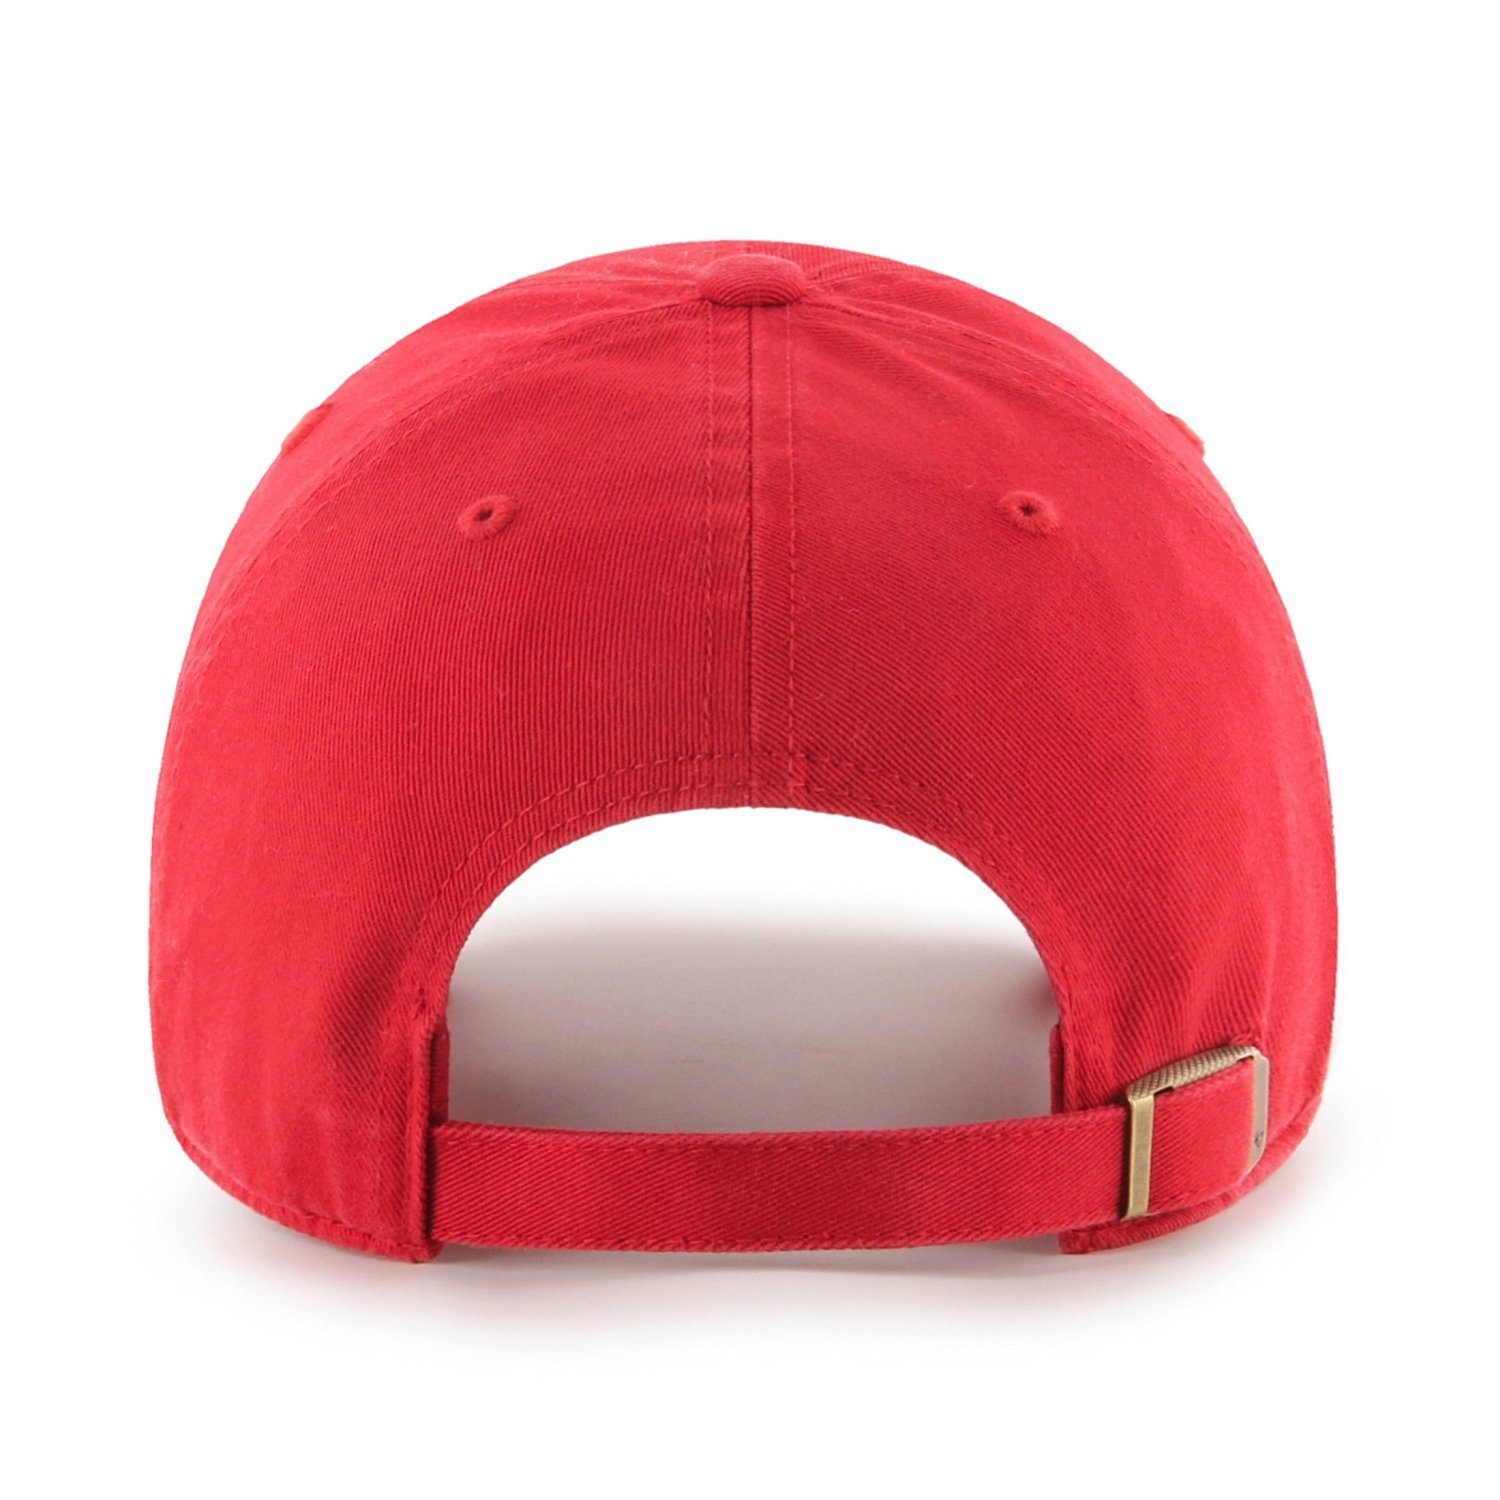 x27;47 Brand FC Fit Liverpool Relaxed Cap Trucker